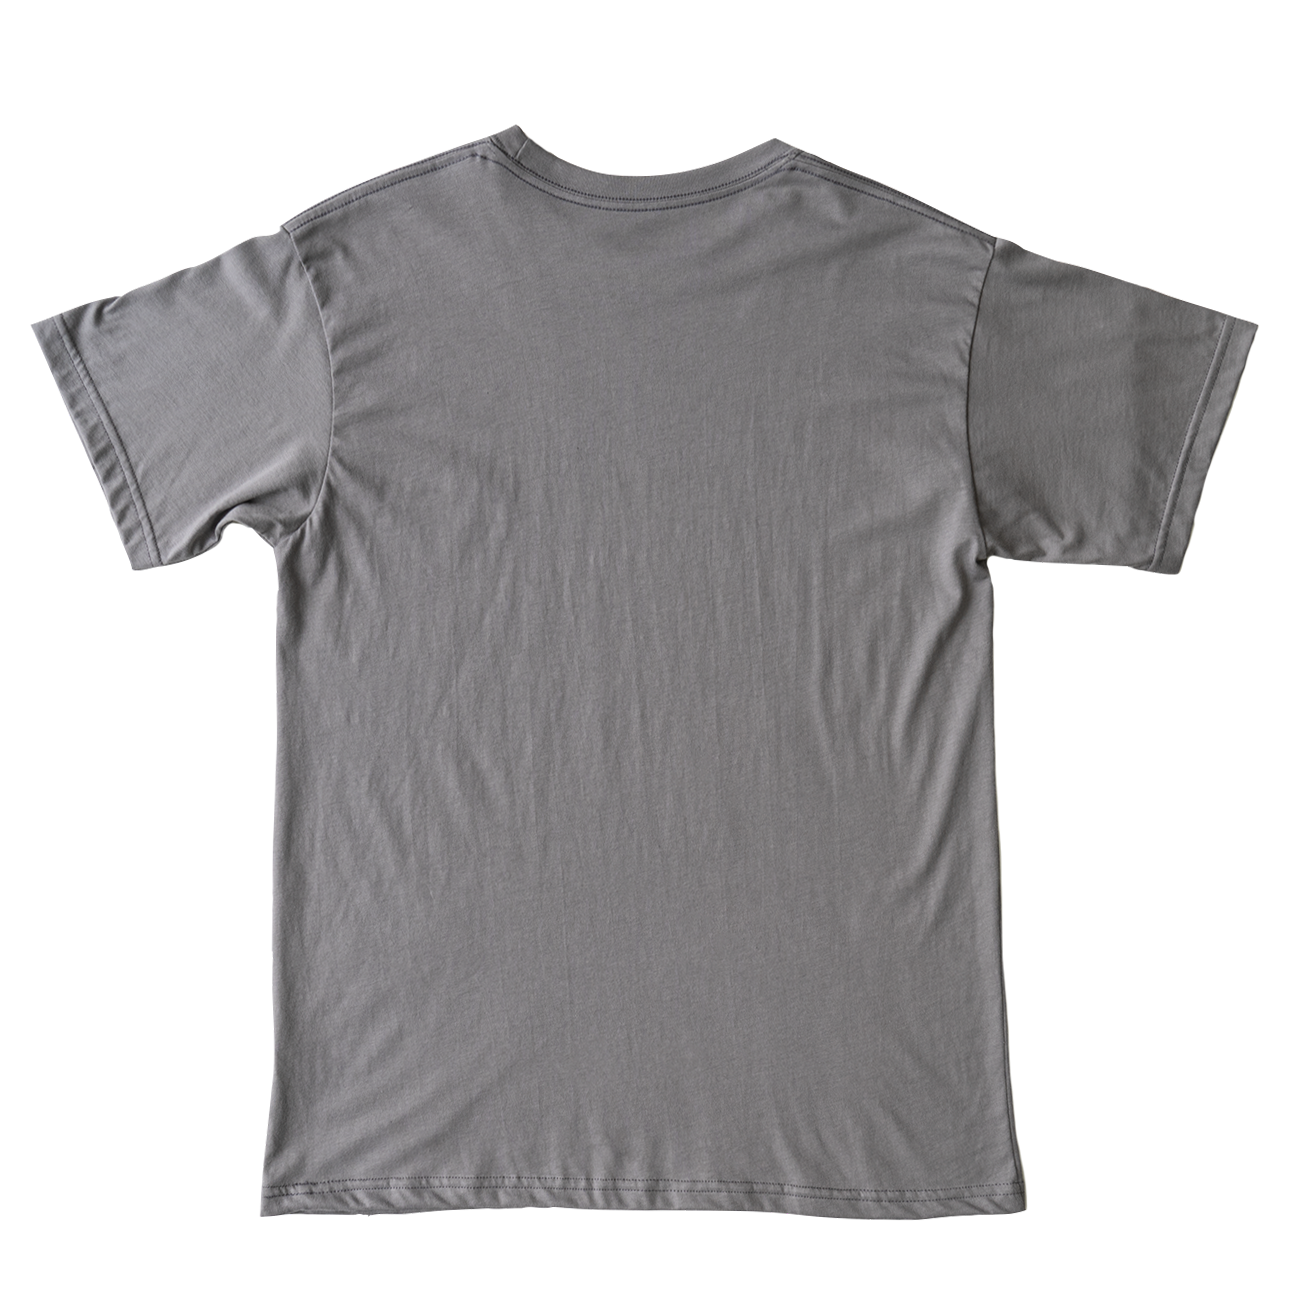 Nature Backs Short Sleeve 100% Organic Cotton T-Shirt | Minimalist Slate Short Sleeve made with Eco-Friendly Fibers Sustainably made in the USA 